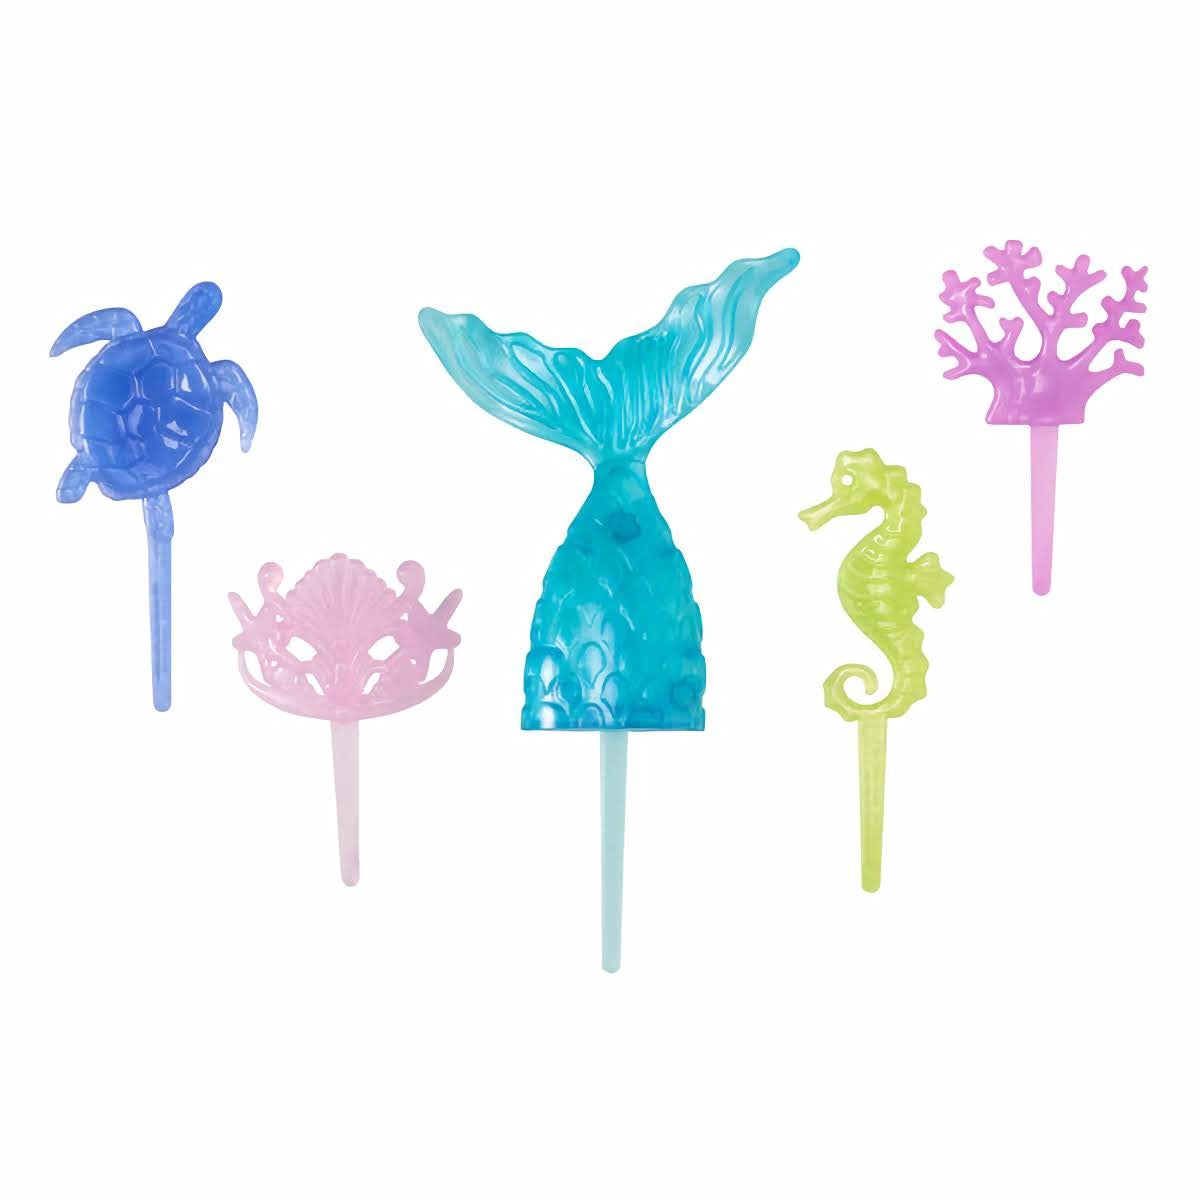 A whimsical mermaid cake topper set featuring sea-themed elements such as a mermaid tail and seashells, perfect for creating an under-the-sea cake design at Lynn's Cake, Candy, and Chocolate Supplies.